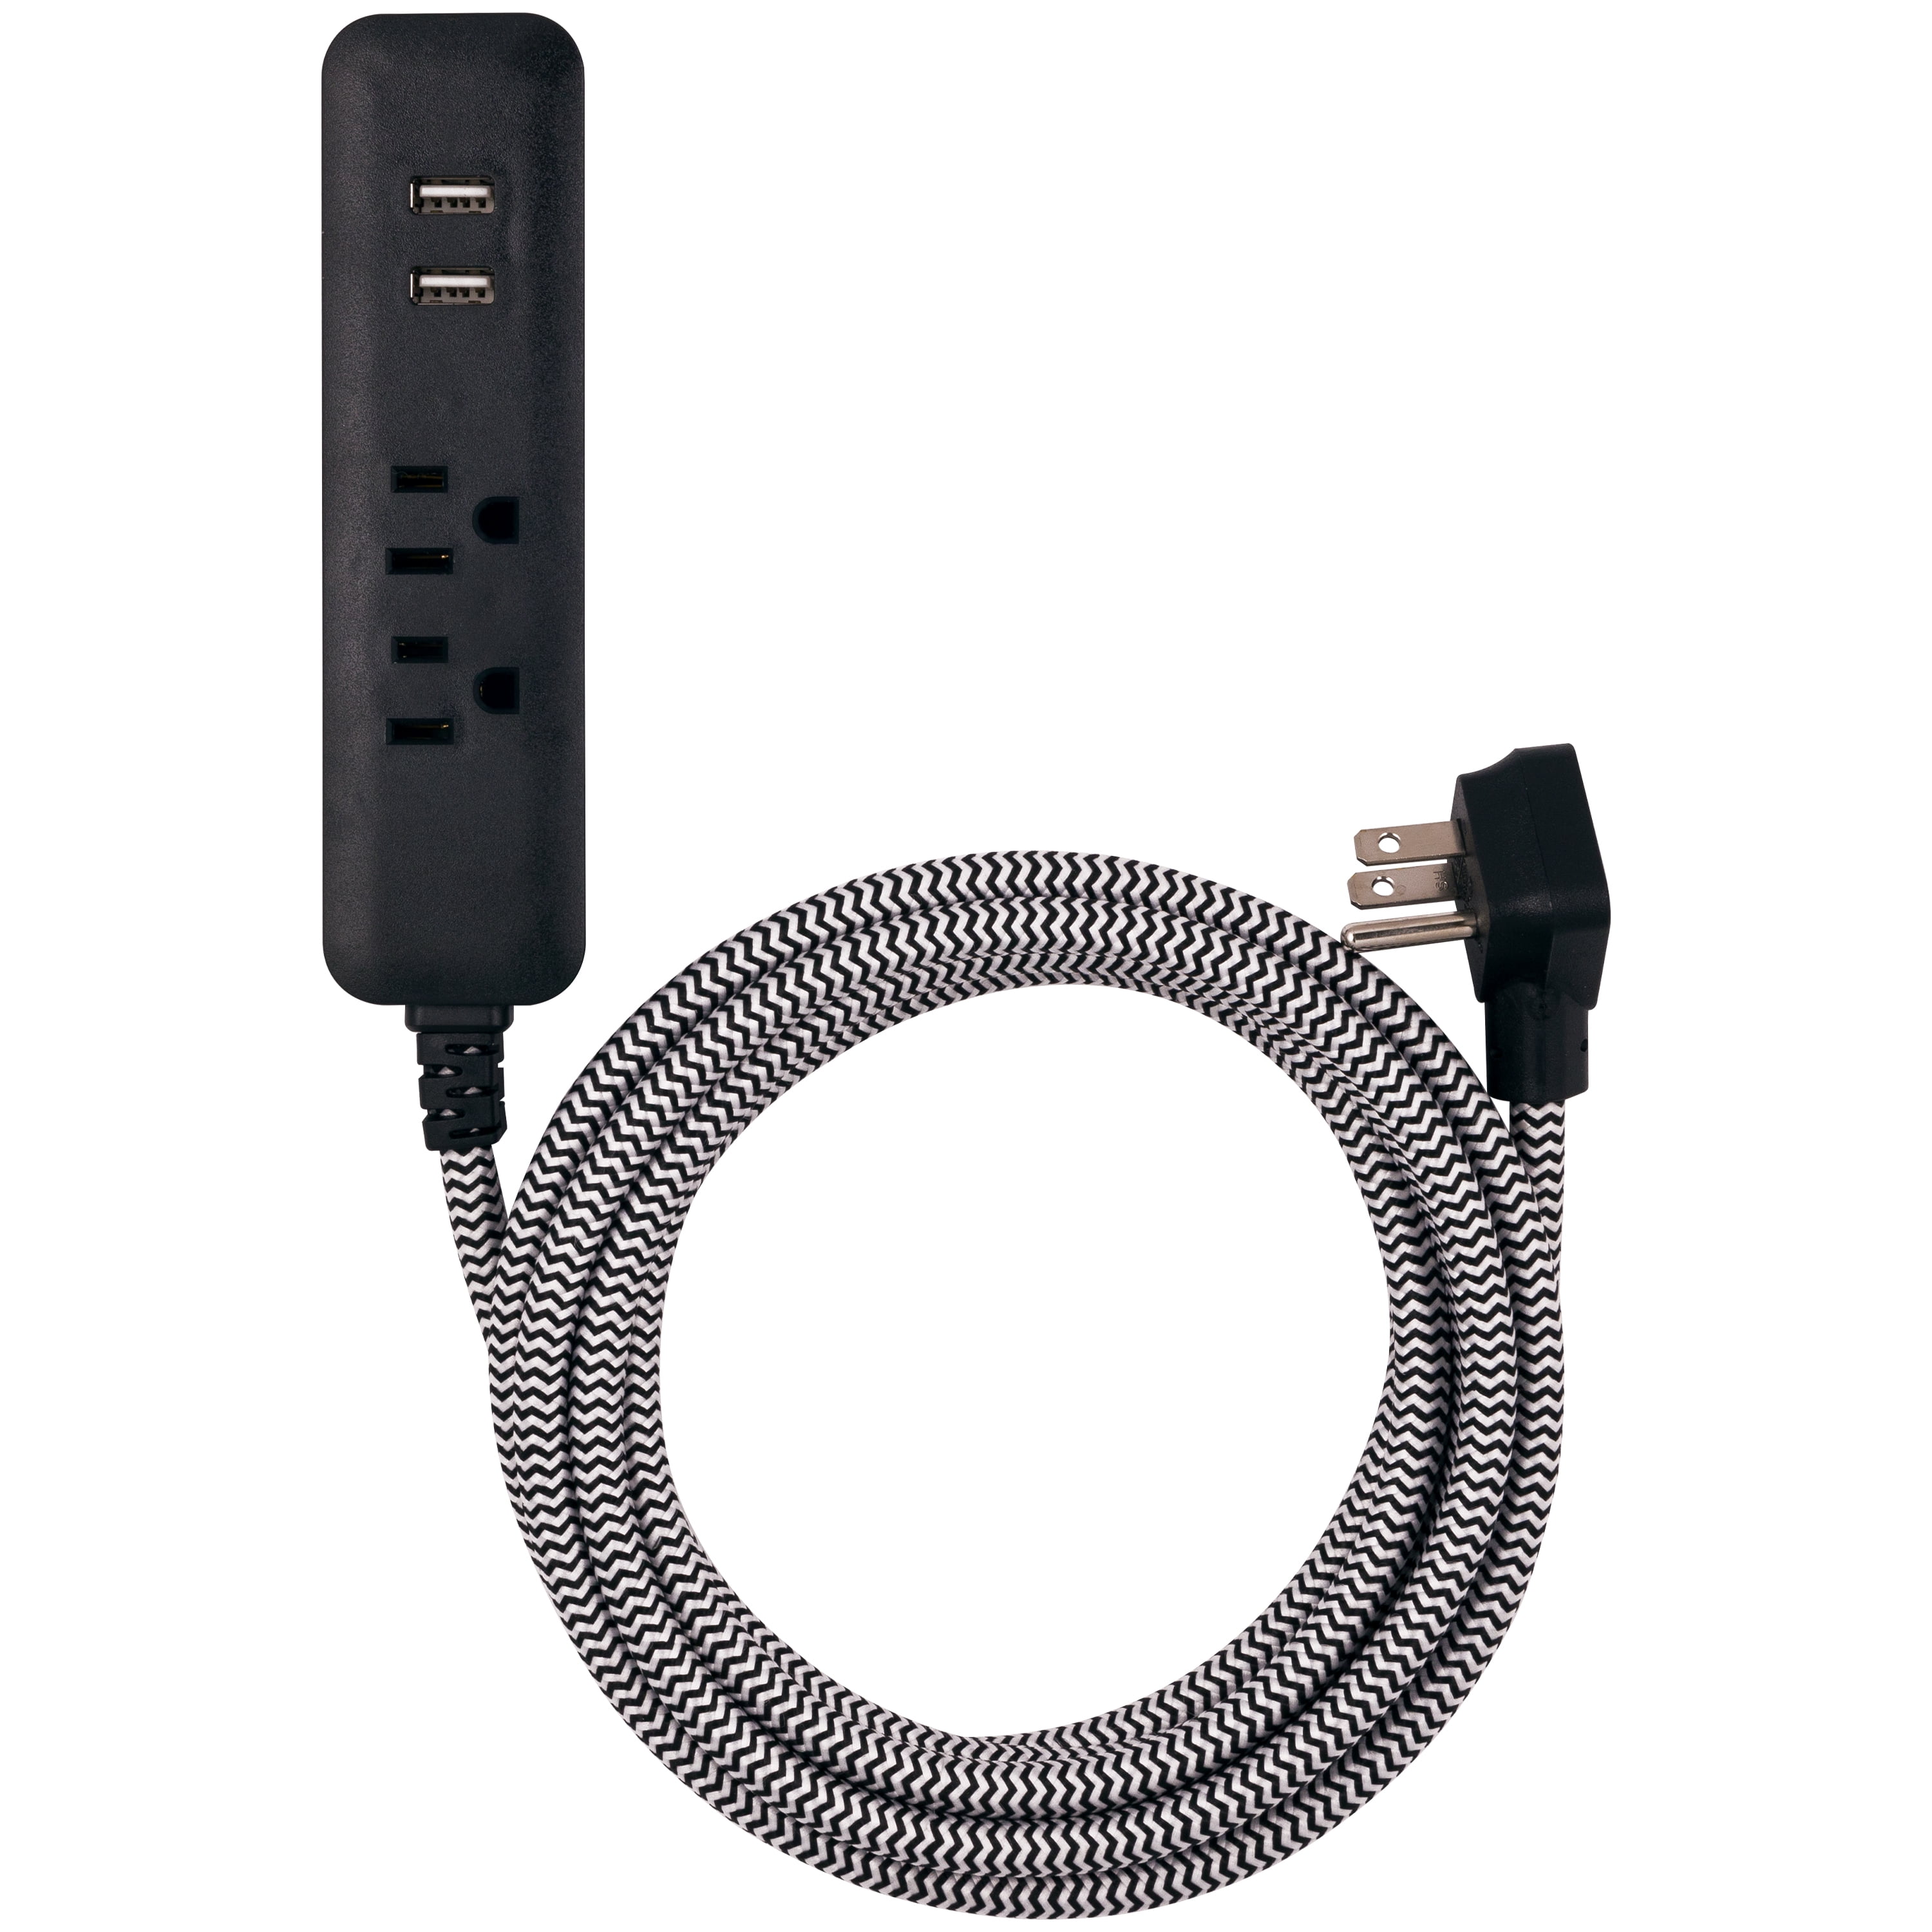 usb cable extension cord